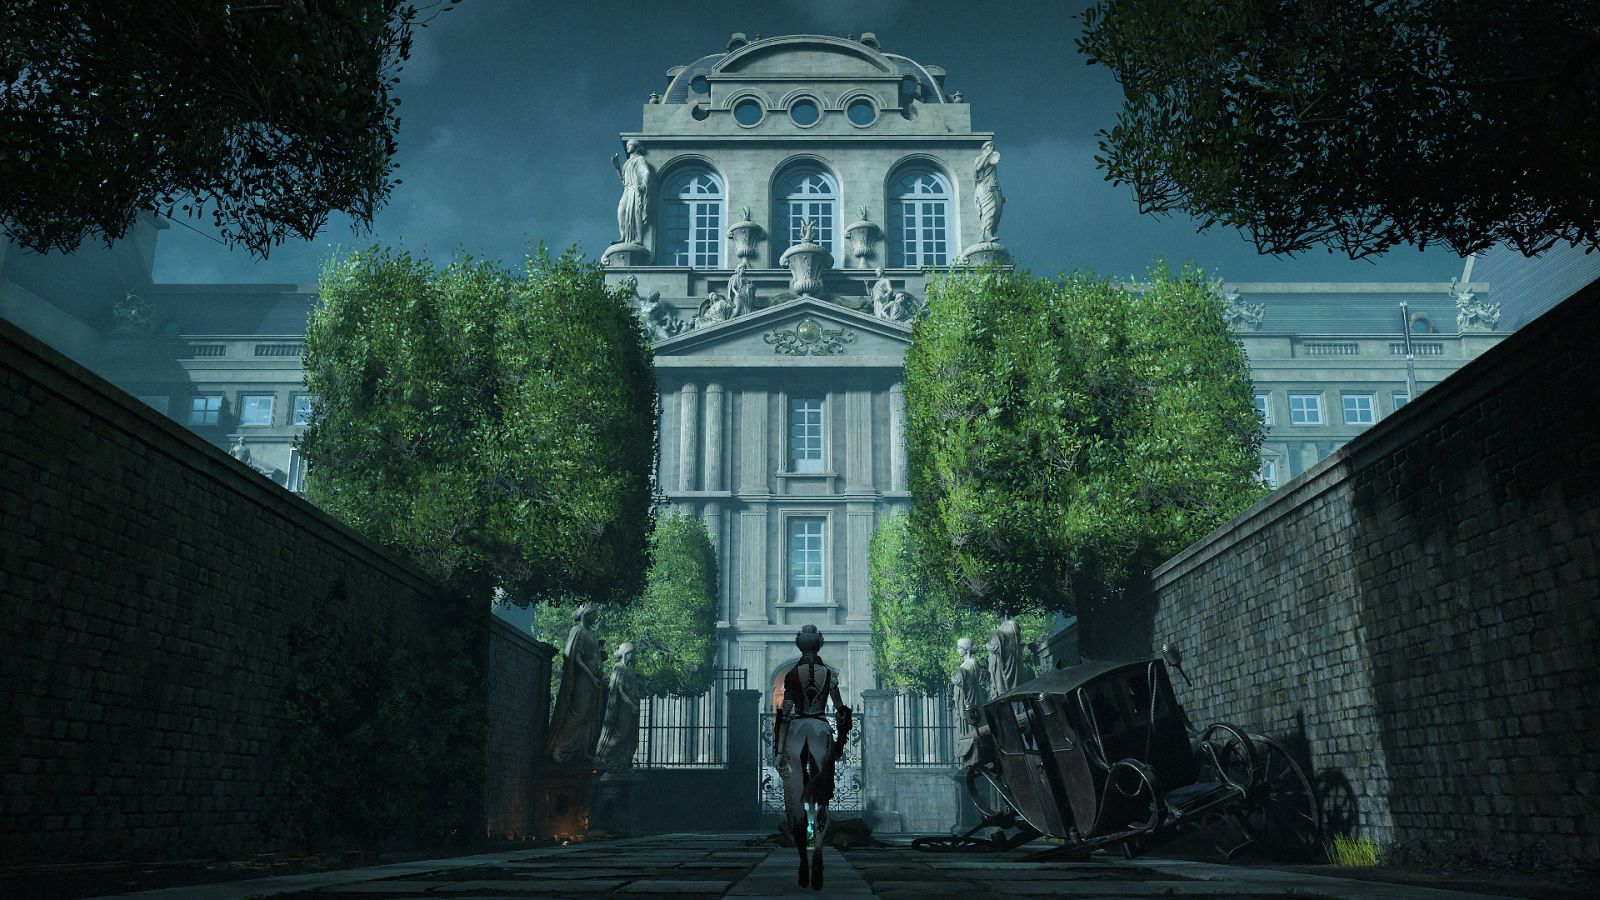 Steelrising Review: A Soulslike Action Game Set In Steampunk Paris